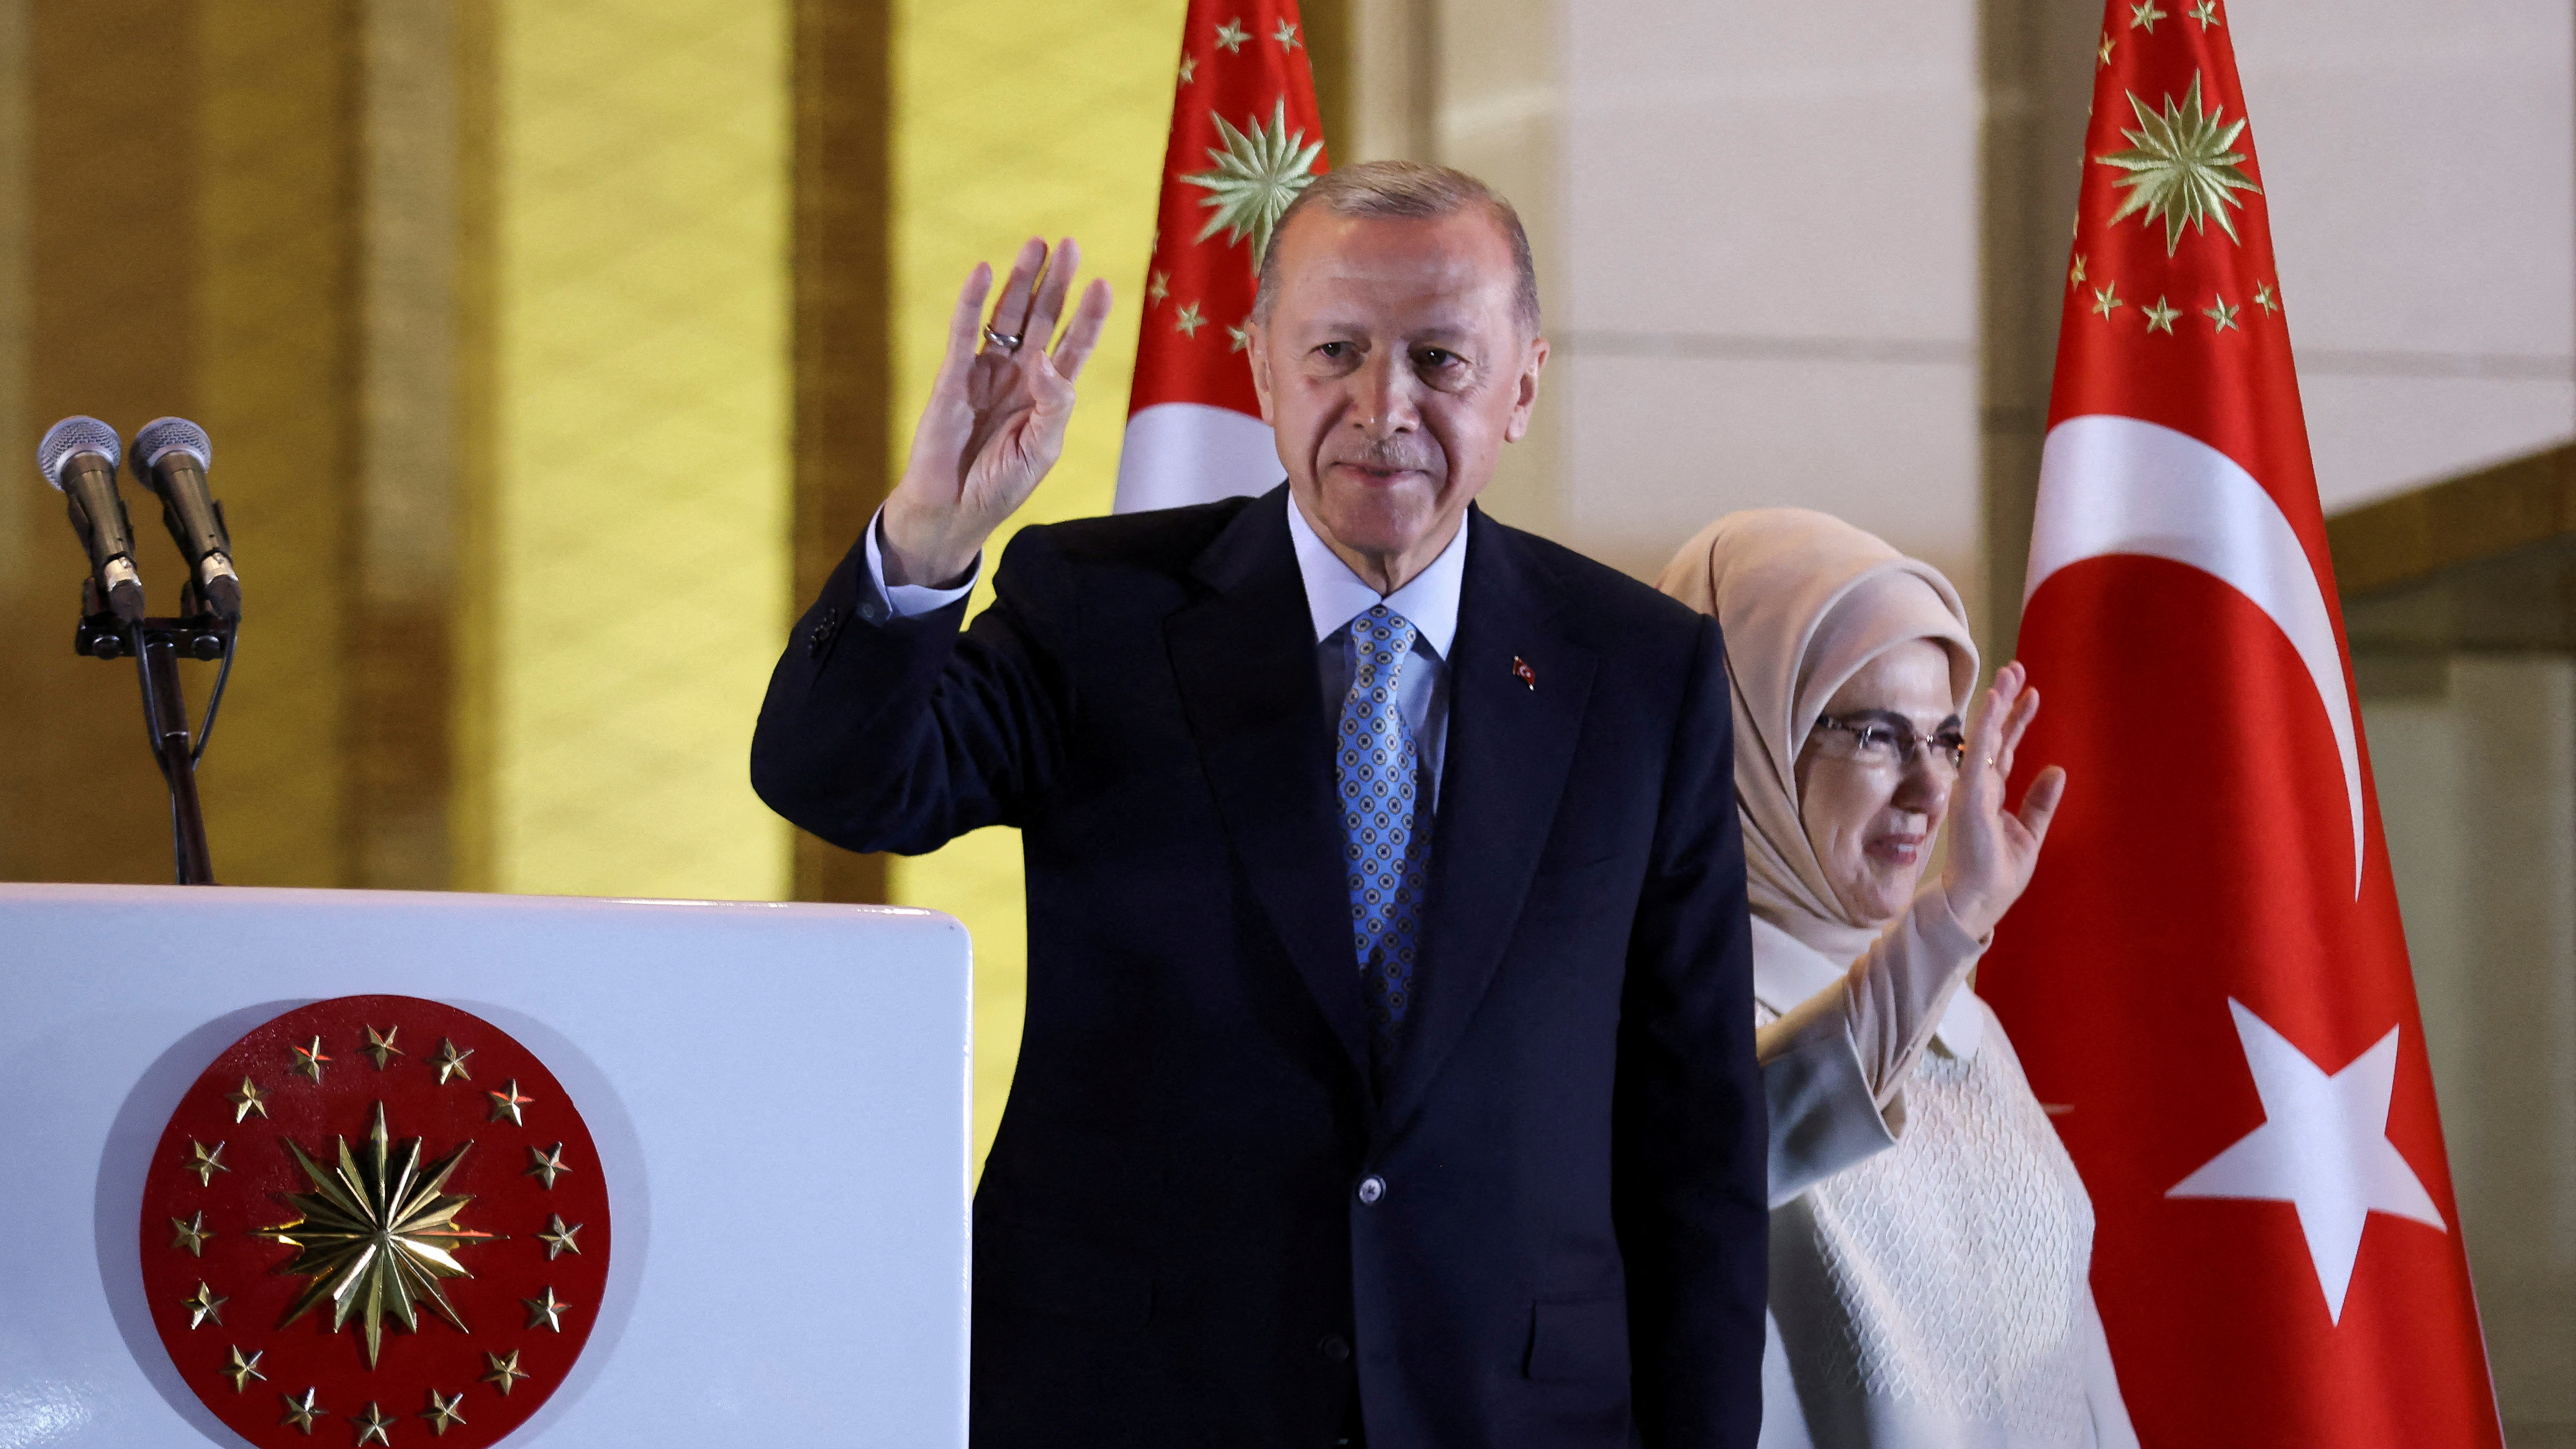 Turkish President Tayyip Erdogan and his wife Ermine Erdogan wave as he addresses his supporters following his victory. Umit Bektas / Reuters